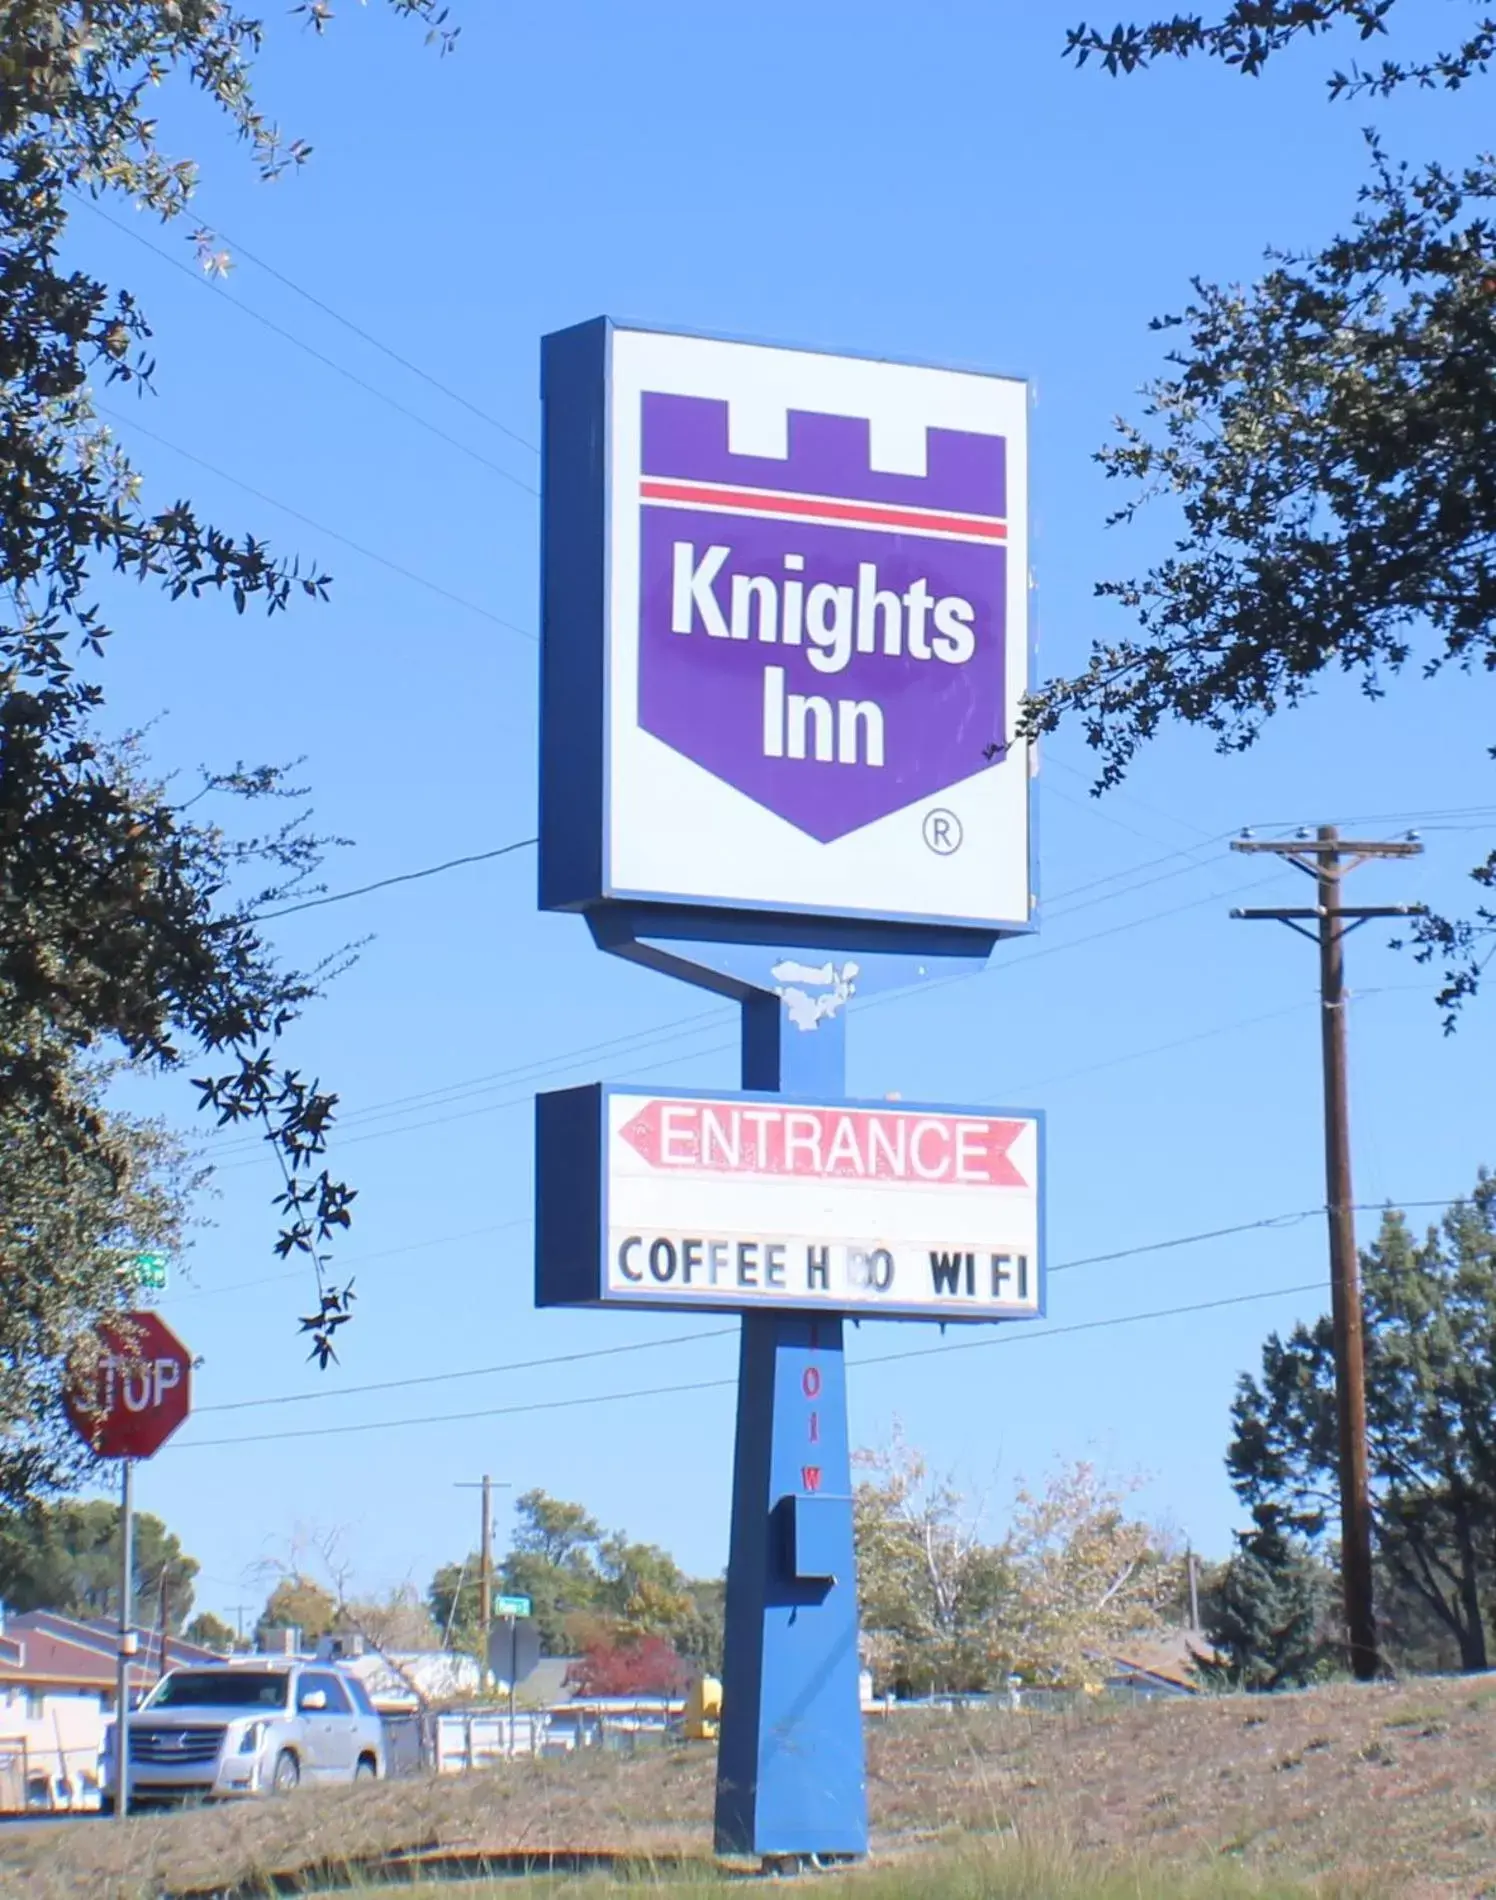 Property logo or sign in Knights Inn Payson